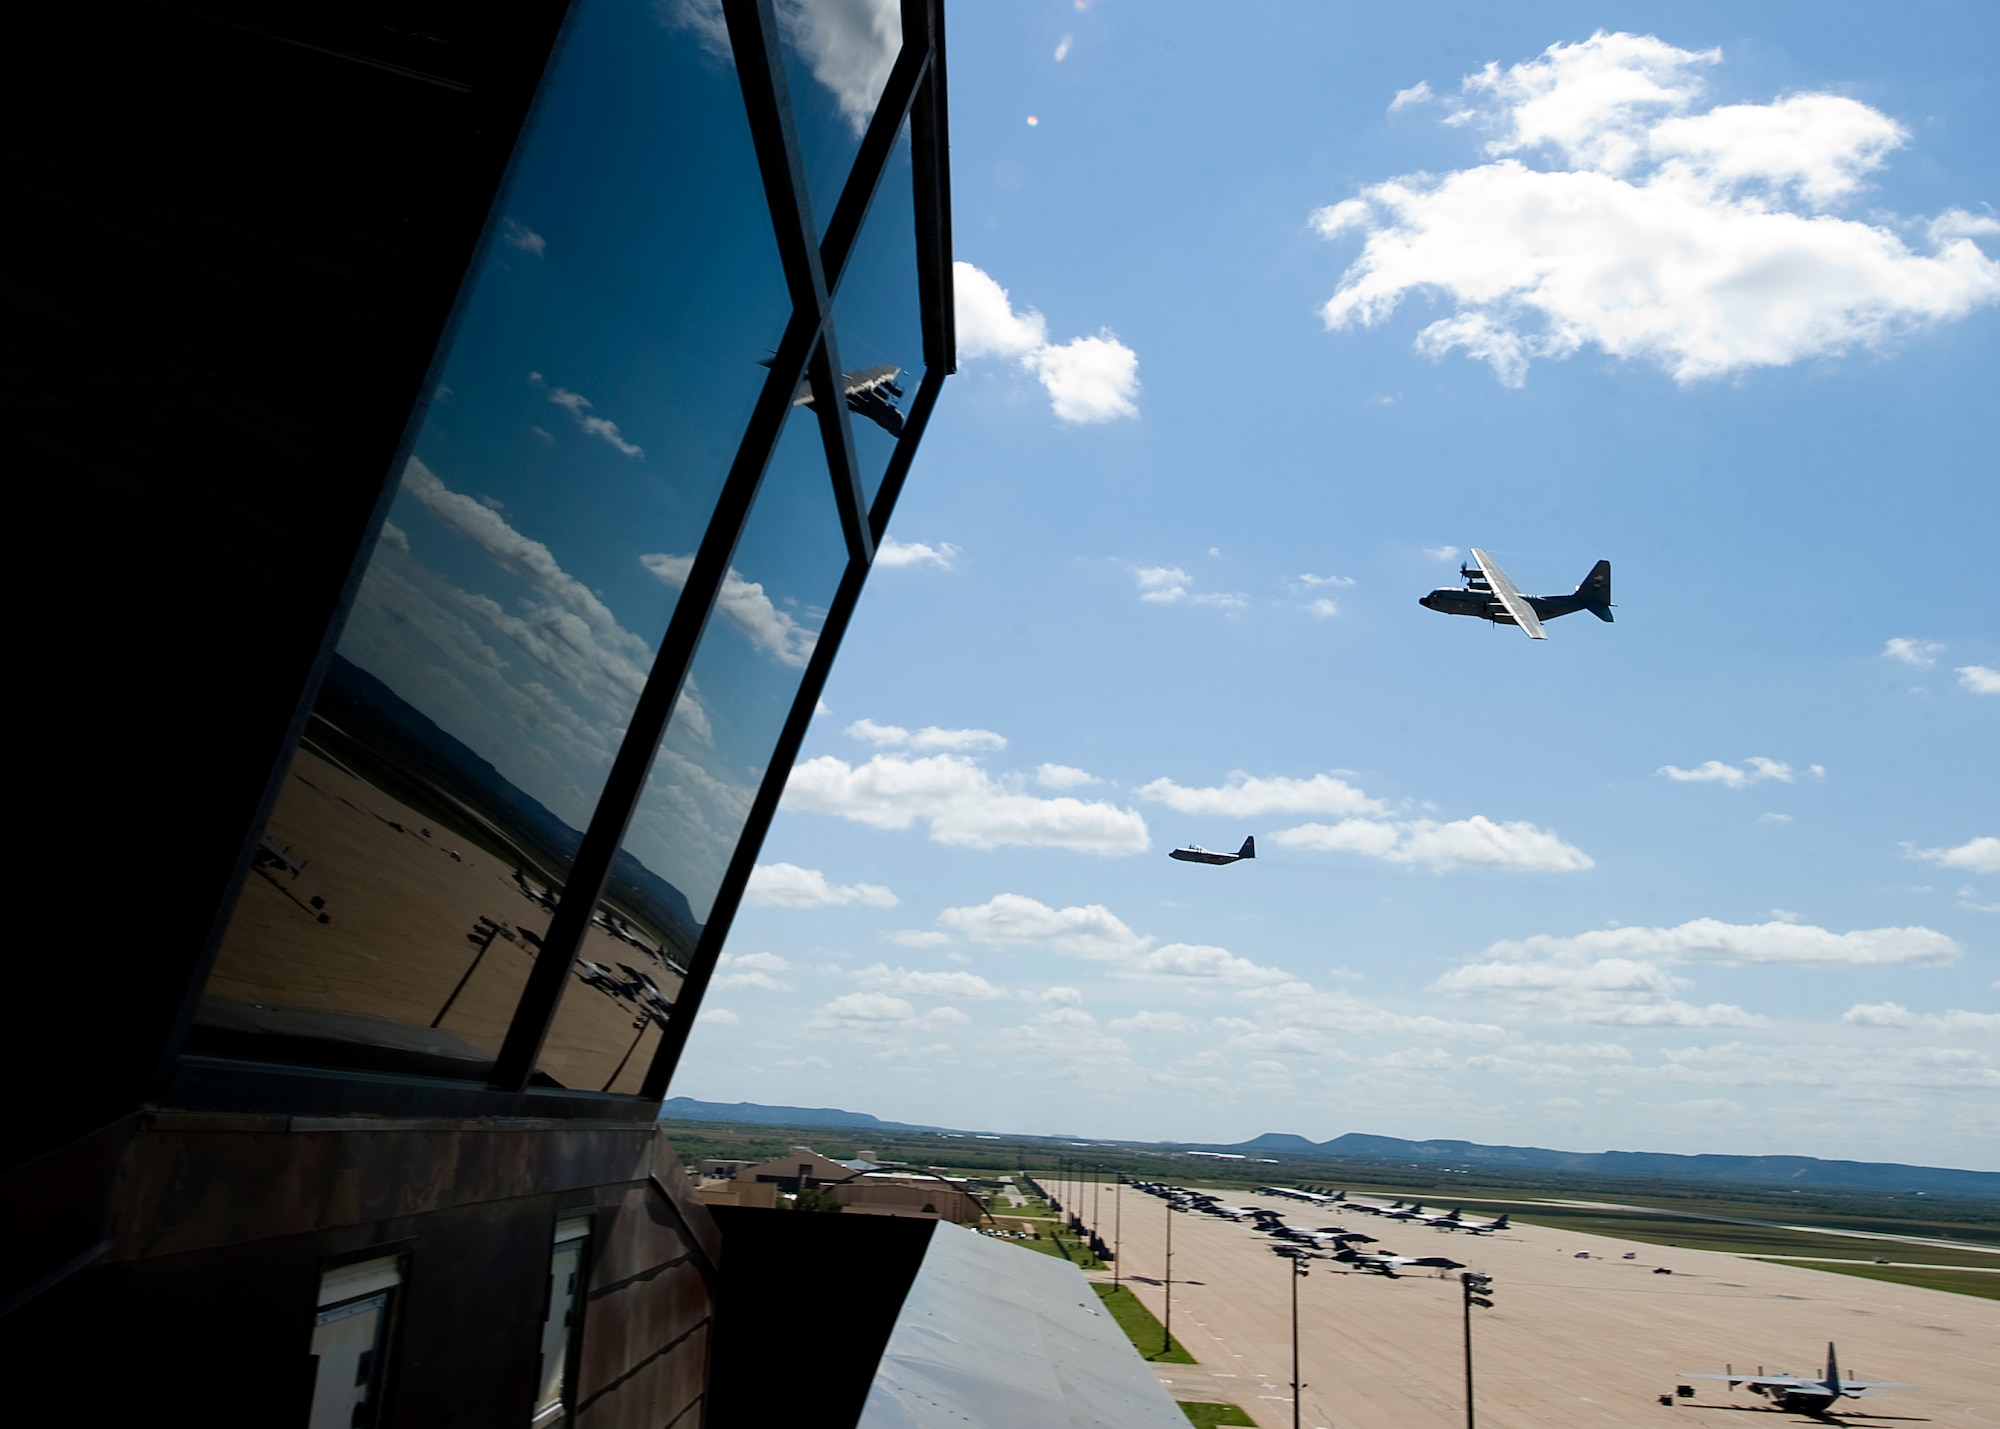 The last C-130 Hercules stationed at Dyess fly past the air traffic control tower Sept. 26, 2012, at Dyess Air Force Base, Texas. For 37 years Dyess’ C-130 Hercules and its Airmen have built a legacy in the Air Force. That legacy came to end Sept. 26 as the last two C-130 H models, tail numbers 1667 and 2063, departed for Little Rock AFB, Ark. (U.S. Air Force photo by Airman 1st Class Damon Kasberg/ Released)